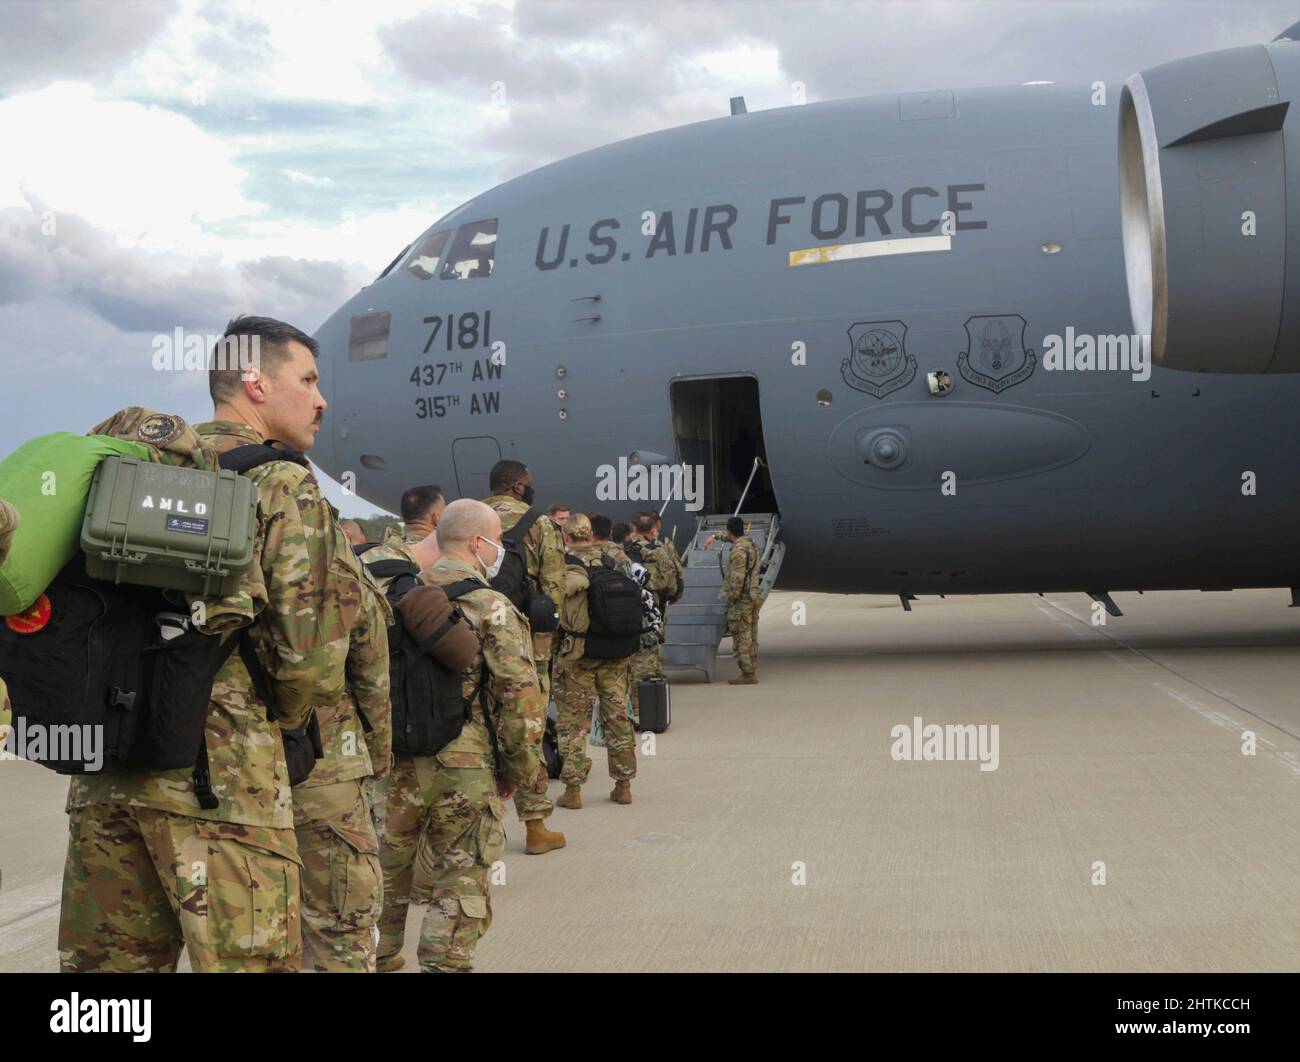 Fort Bragg, United States. 04 February, 2022. U.S. Army paratroopers, with the 82nd Airborne Division, board a C-17 Globemaster III transport aircraft for deployment to Poland from Fort Bragg airfield, February 4, 2022 in Fort Bragg, North Carolina. The soldiers are deploying to Eastern Europe in support of NATO allies and deter Russian aggression toward Ukraine. Credit: Spc. Casey Brumbach/U.S Army/Alamy Live News Stock Photo